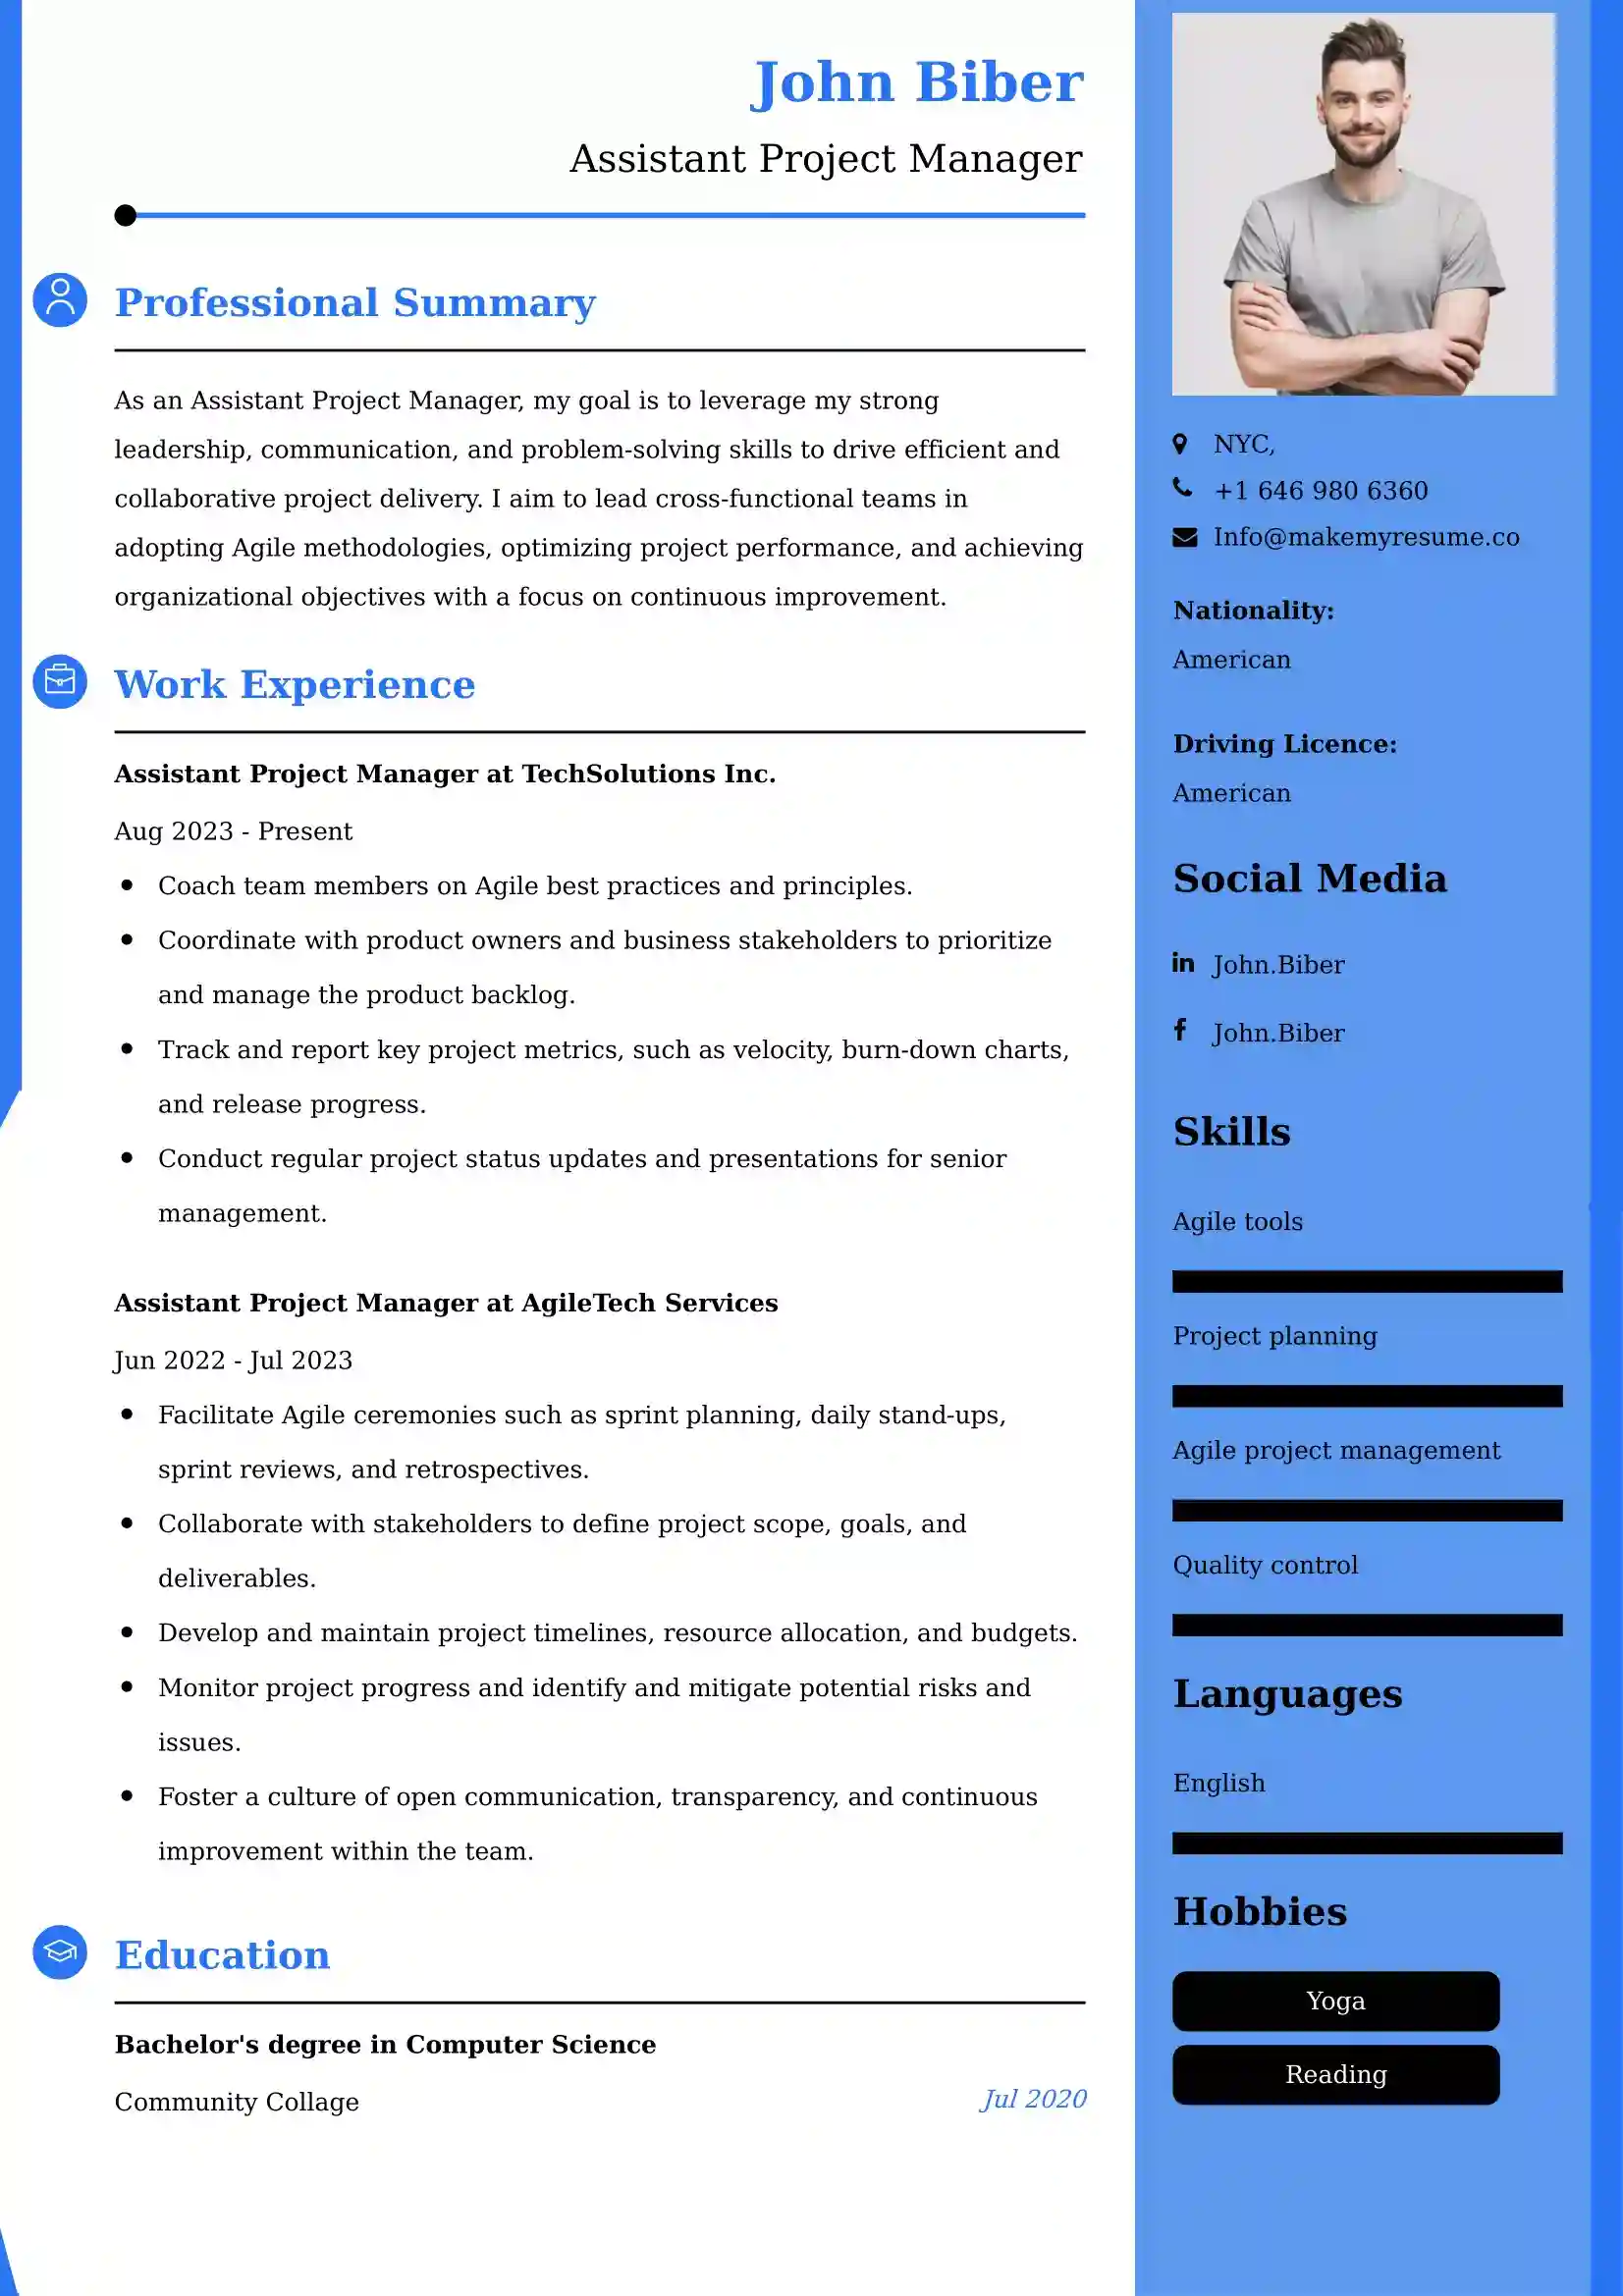 Assistant Project Manager Resume Examples - UK Format, Latest Template.